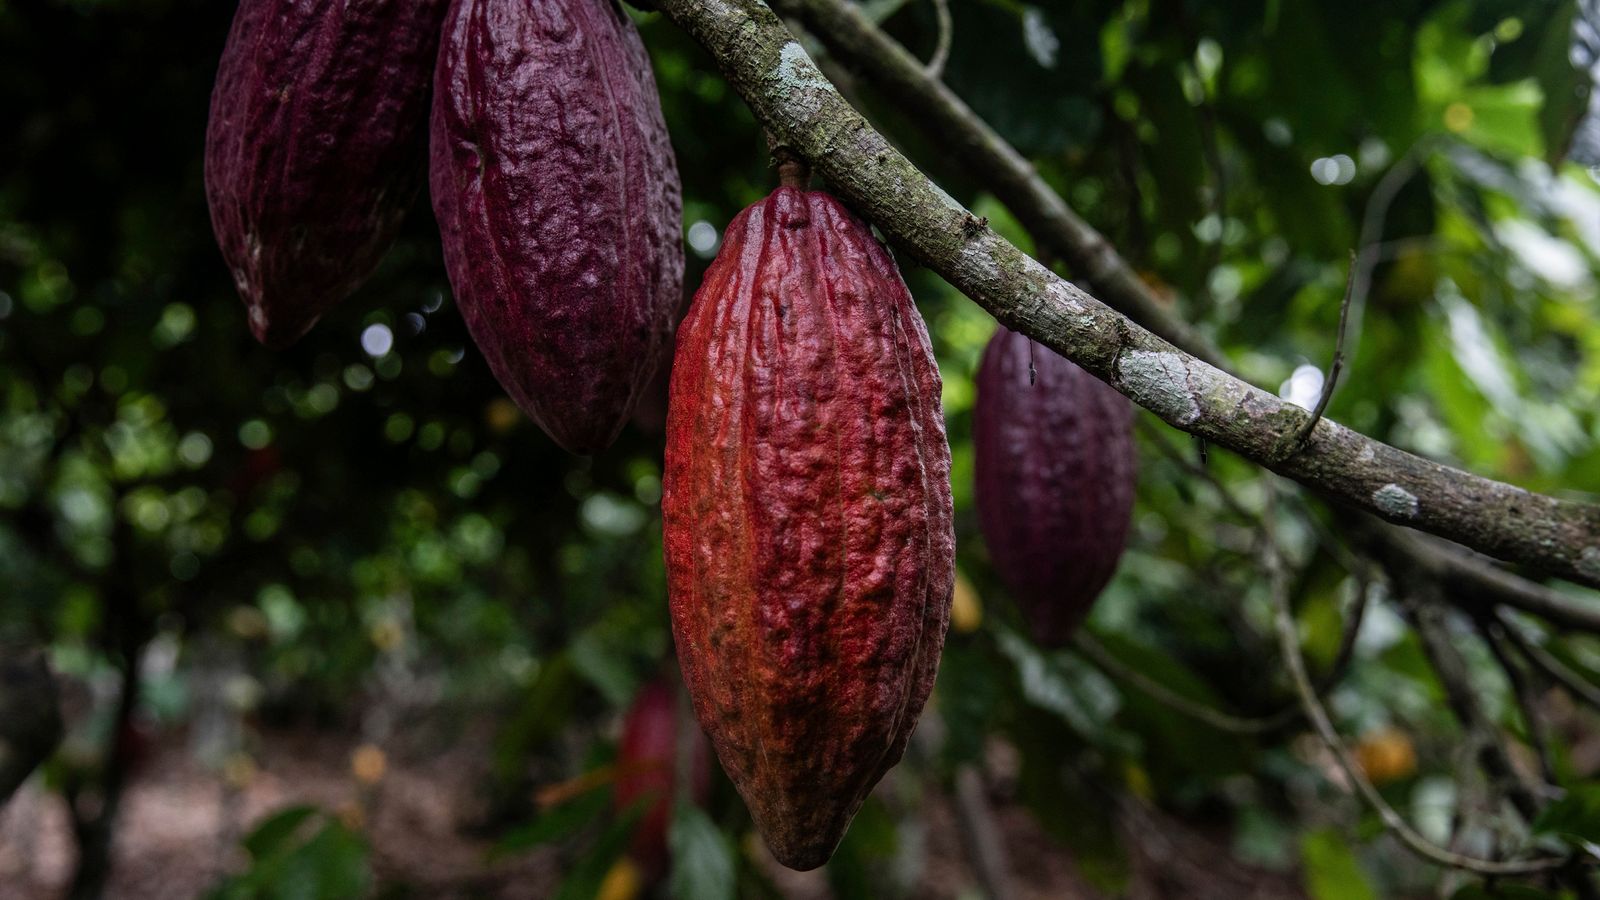 Chocolate prices could soar as changing climate patterns worsen cocoa crisis